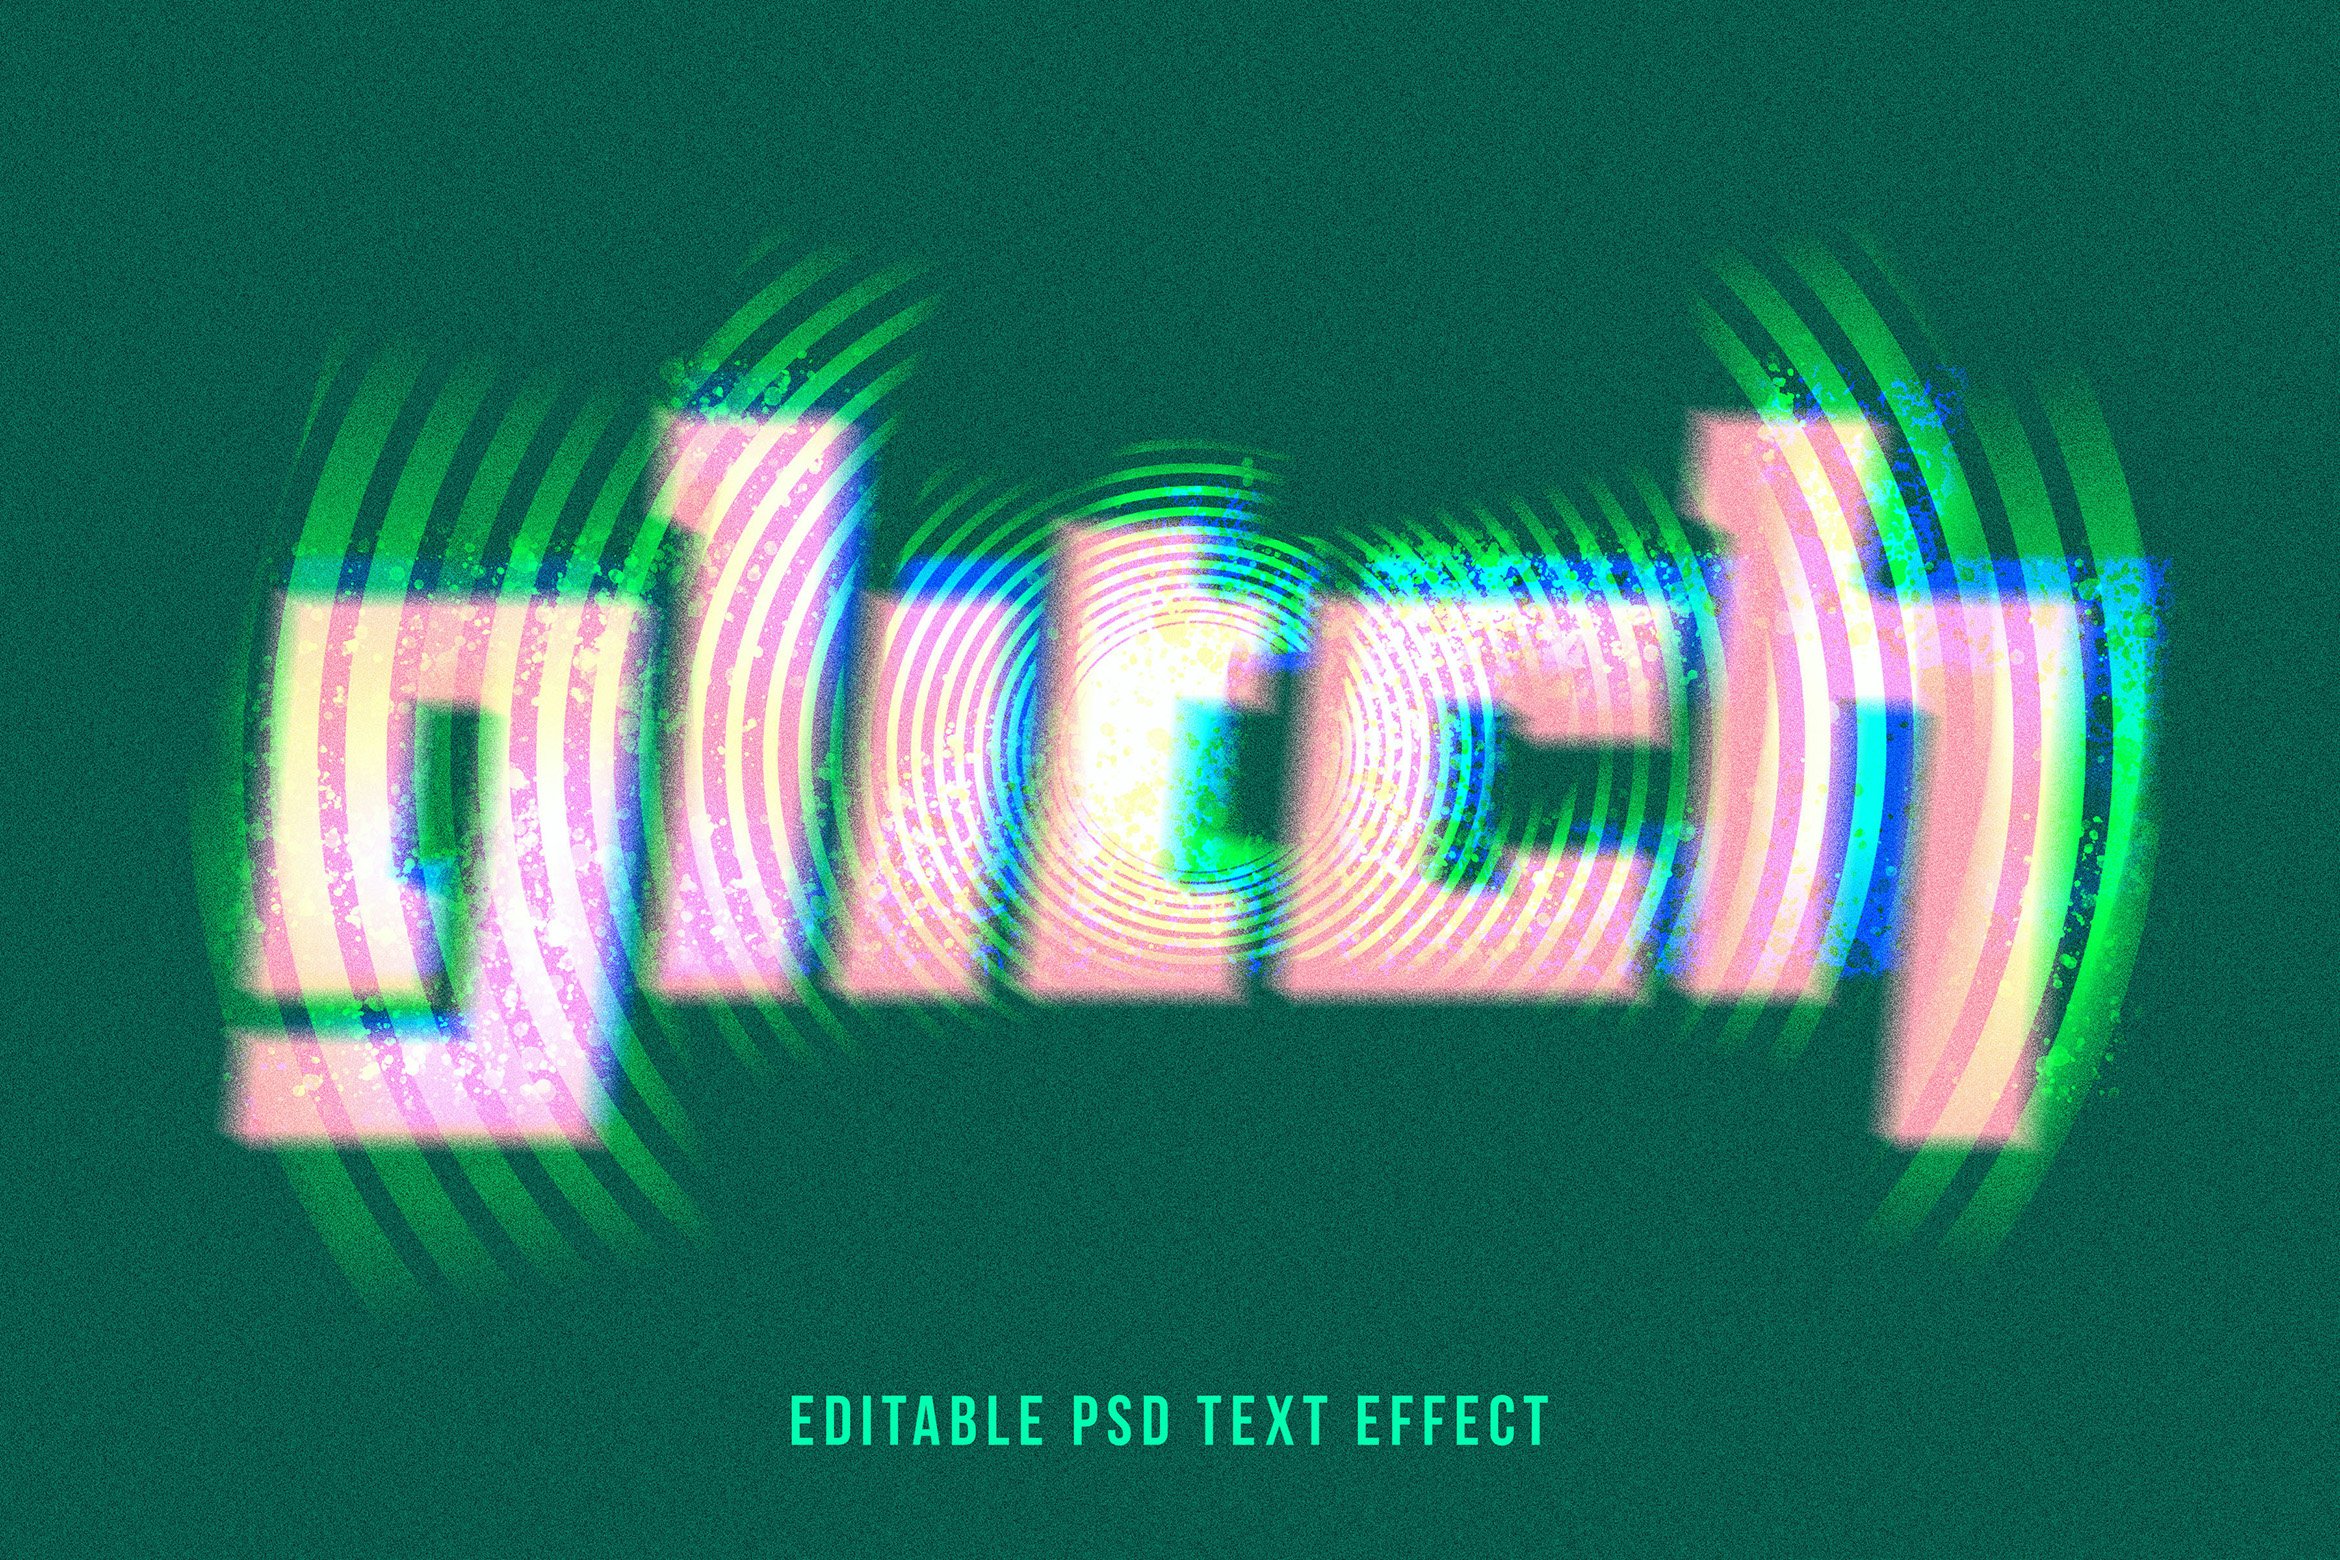 Glitch text effectpreview image.